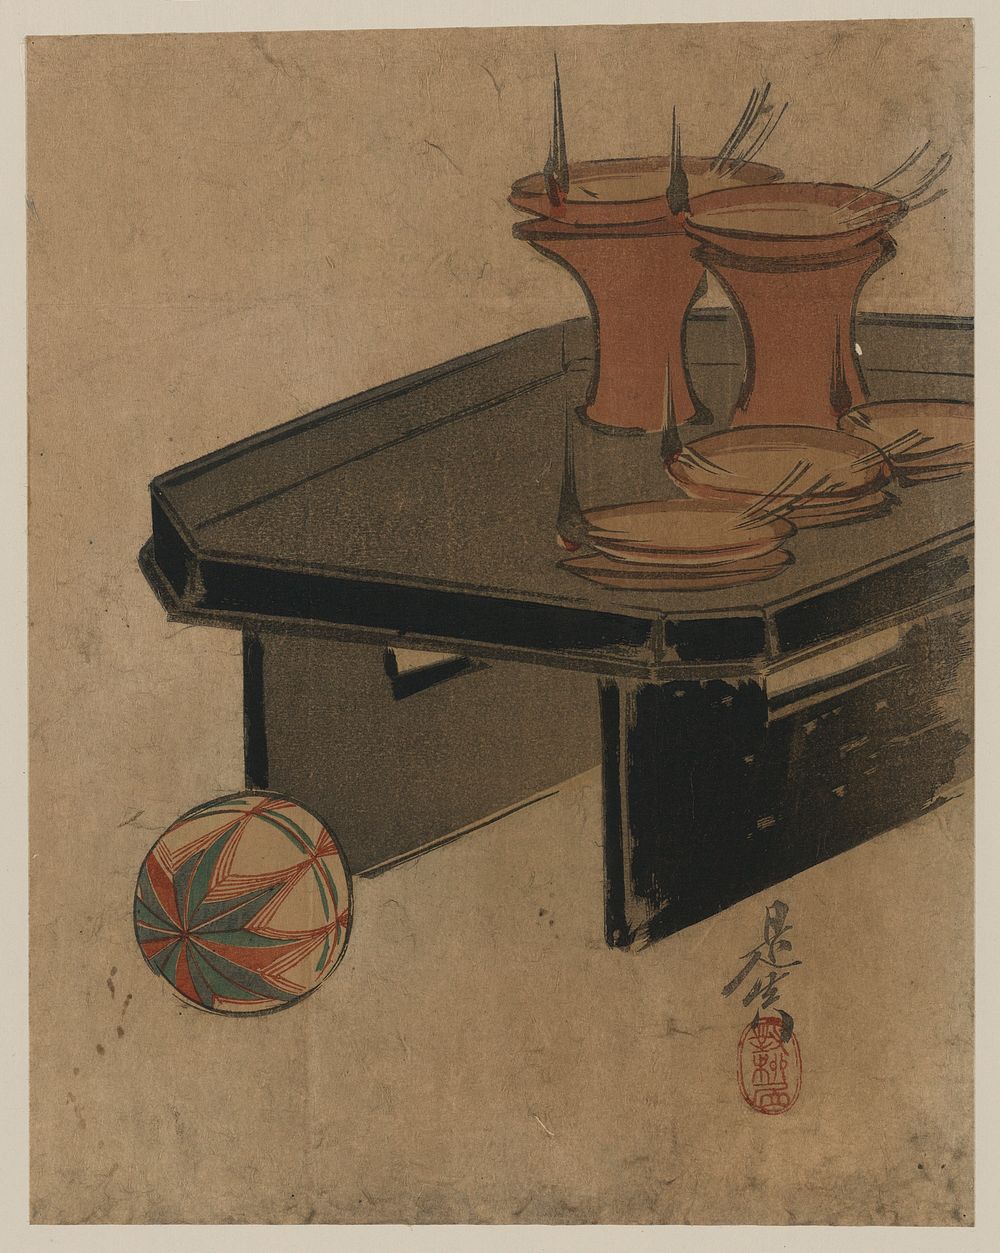 Otōmyō (between 1868 and 1890) print in high resolution by Shibata Zeshin. Original from the Library of Congress. 